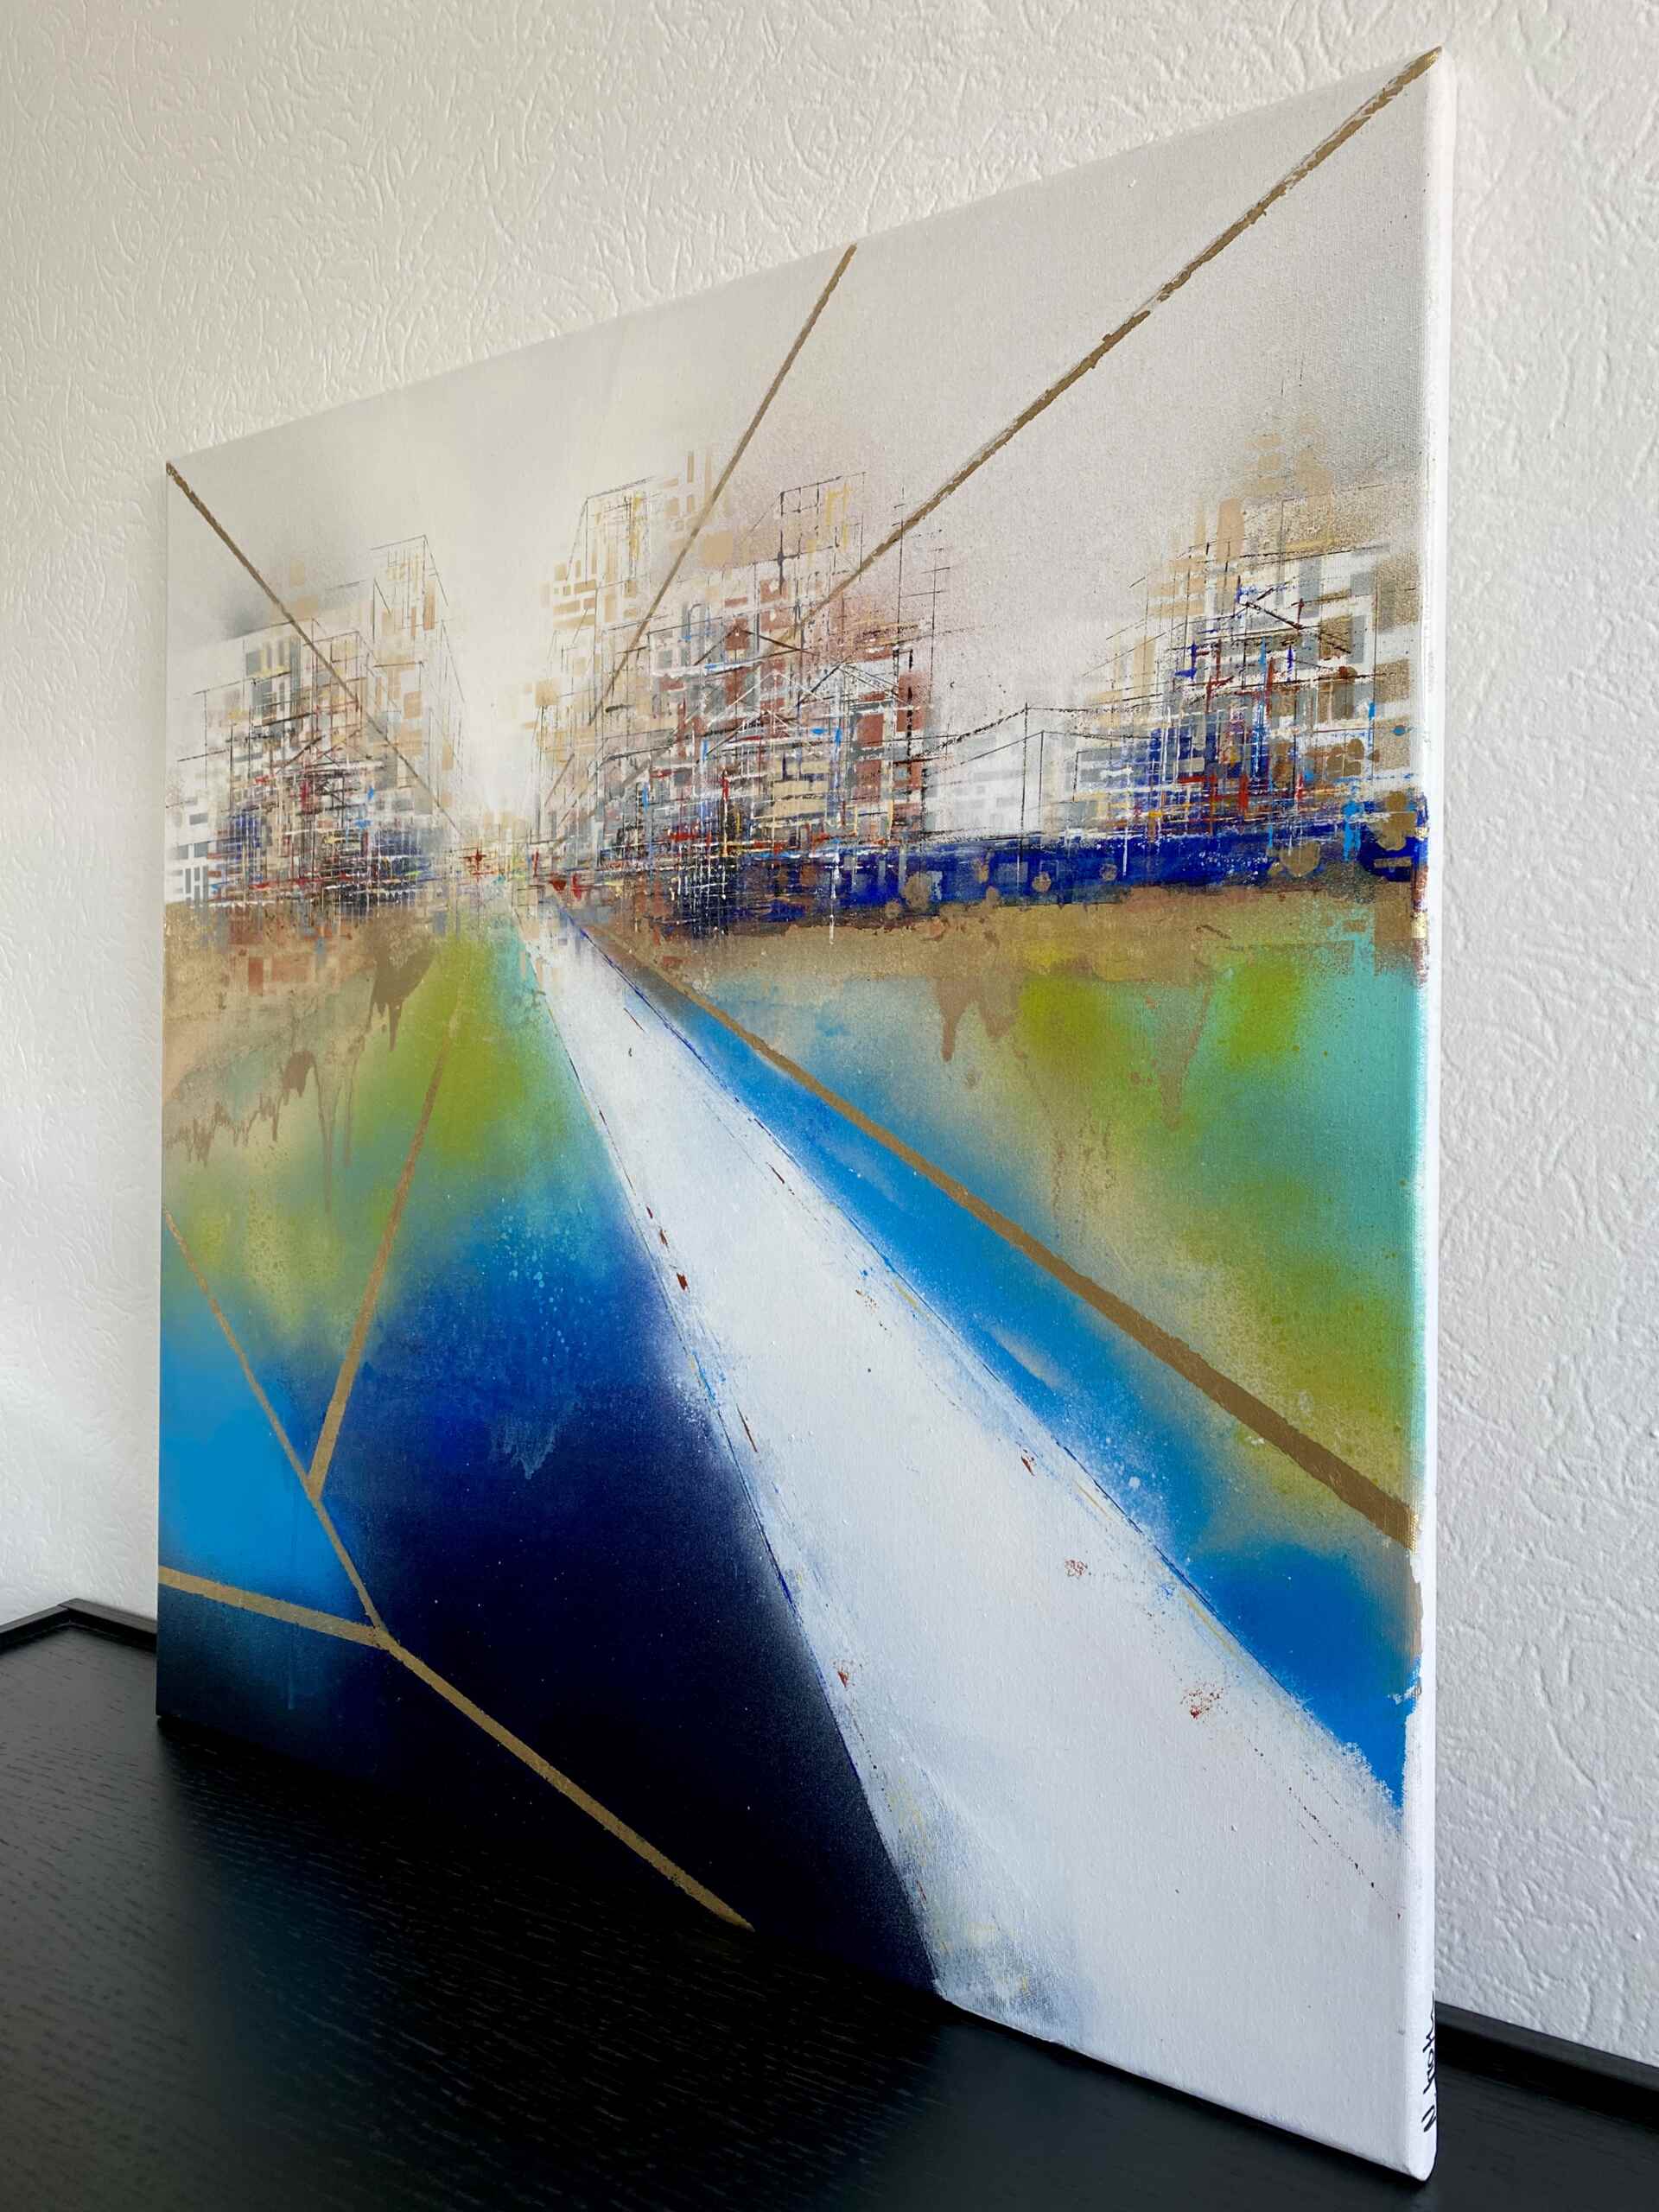 Side view of artwork "City Calling No 2" by Nina Groth